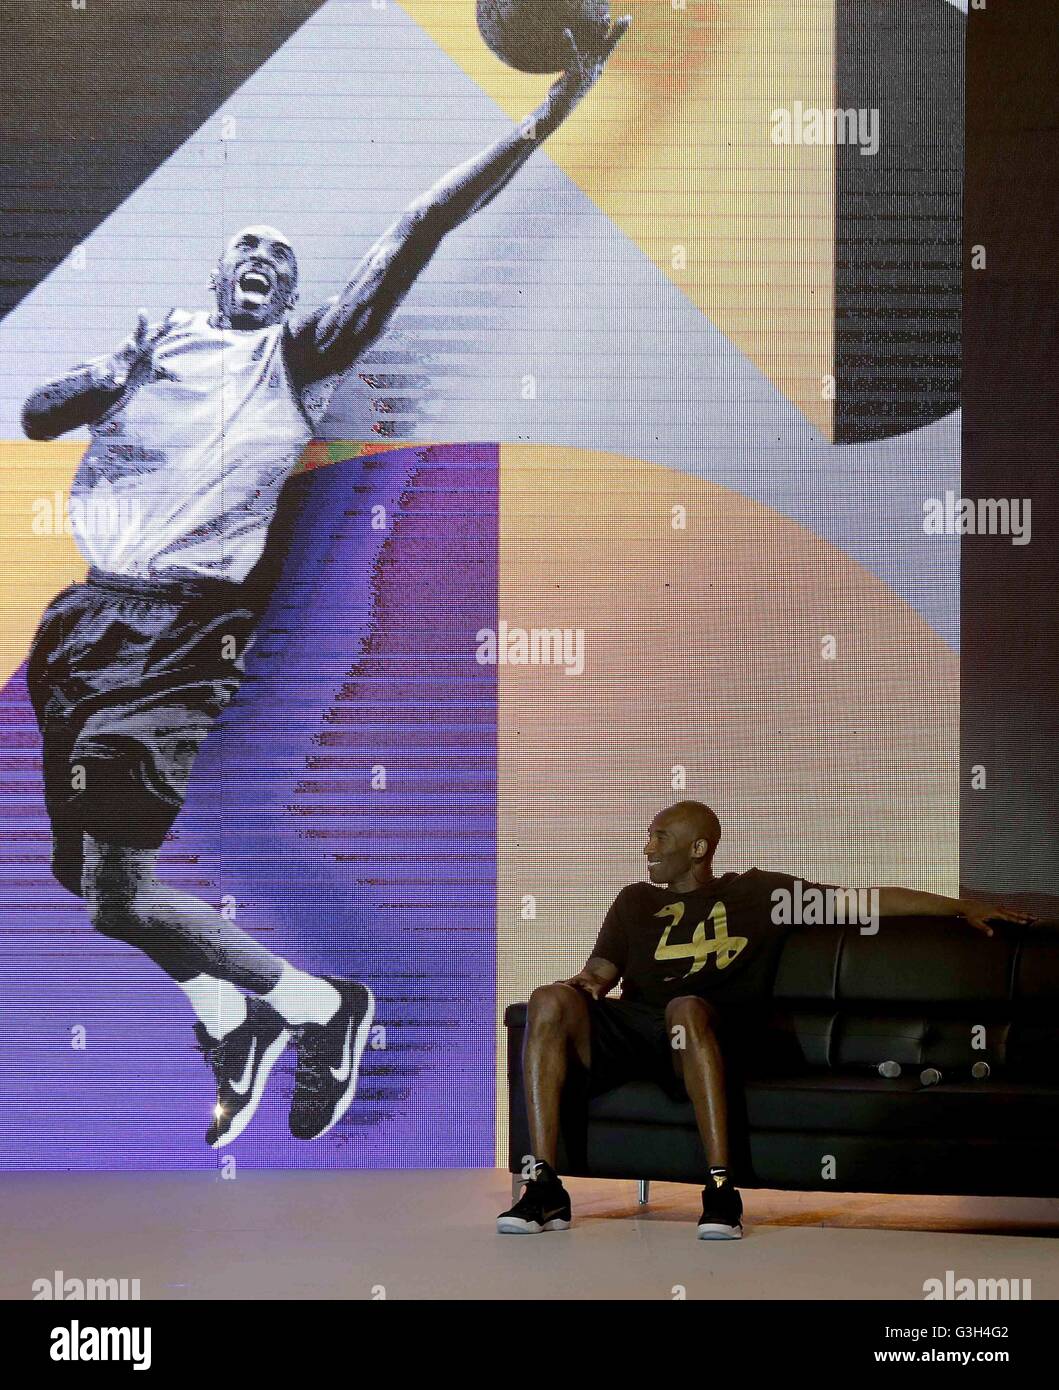 Taguig City, Philippines. 25th June, 2016. Basketball icon Kobe Bryant attends a press conference for the Mamba Mentality Tour in Taguig City, the Philippines, June 25, 2016. Kobe Bryant is in the Philippines for his seventh time for a series of events including teaching Filipino youth at a basketball camp. Credit:  Rouelle Umali/Xinhua/Alamy Live News Stock Photo